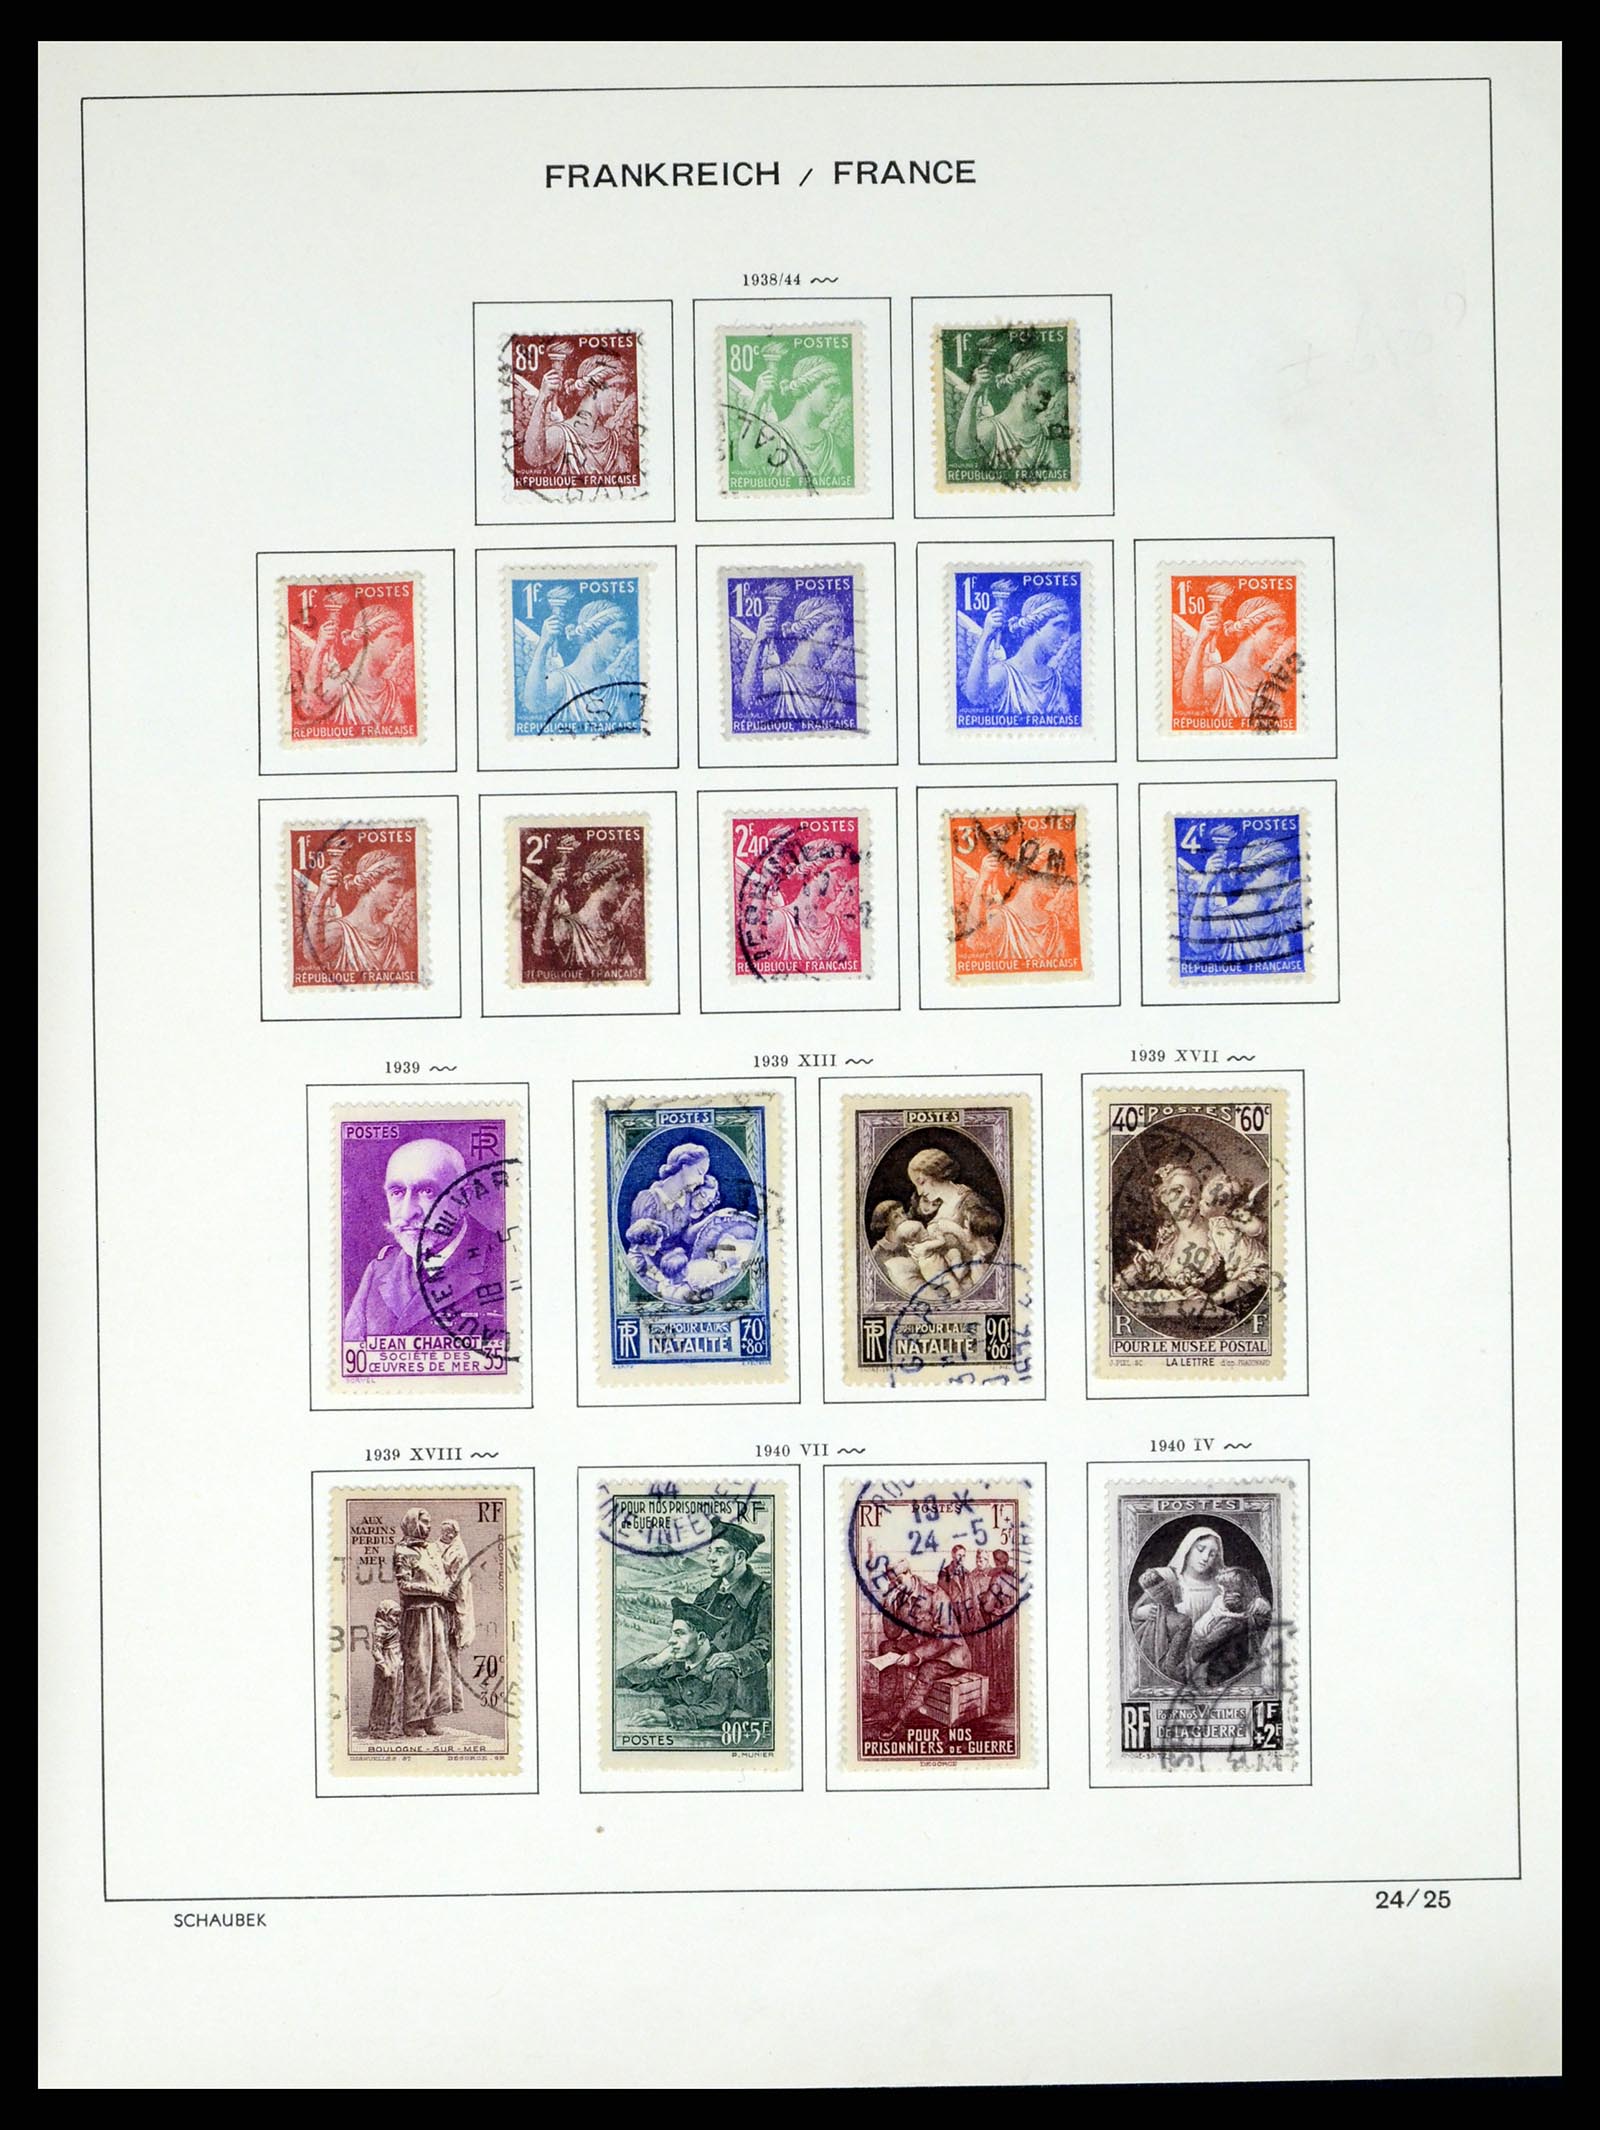 37355 040 - Stamp collection 37355 France 1849-1985.